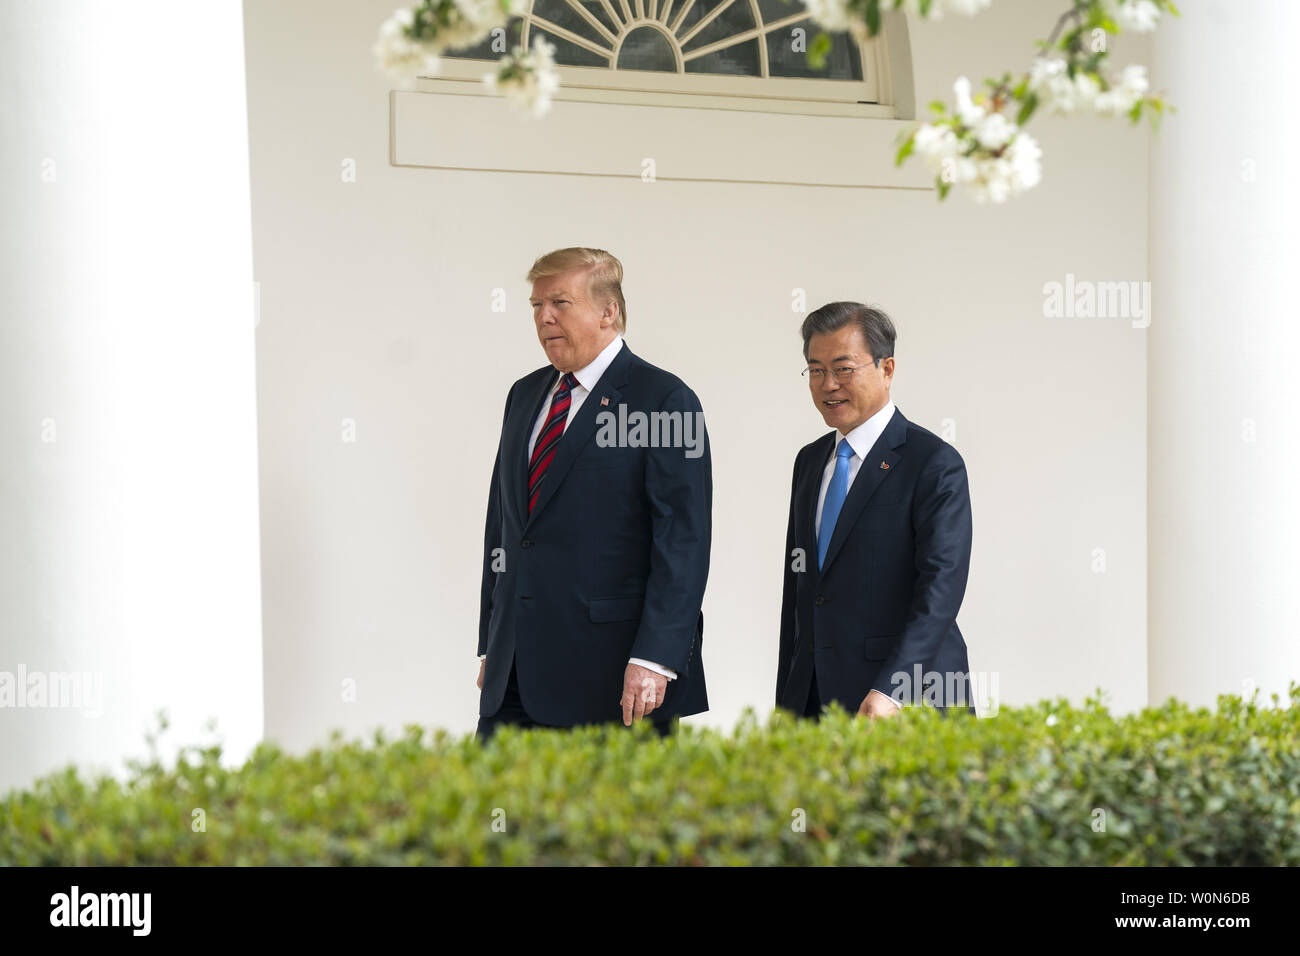 US President Donald J. Trump (L) and Korean President Moon Jae-in (R) walk along the Colonnade of the White House in Washington on April 11, 2019. President Moon is expected to ask President Trump to reduce sanctions on North Korea in an attempt to jump start nuclear negotiations between North Korea and the US.  Photo by Jim Lo Scalzo/UPI Stock Photo